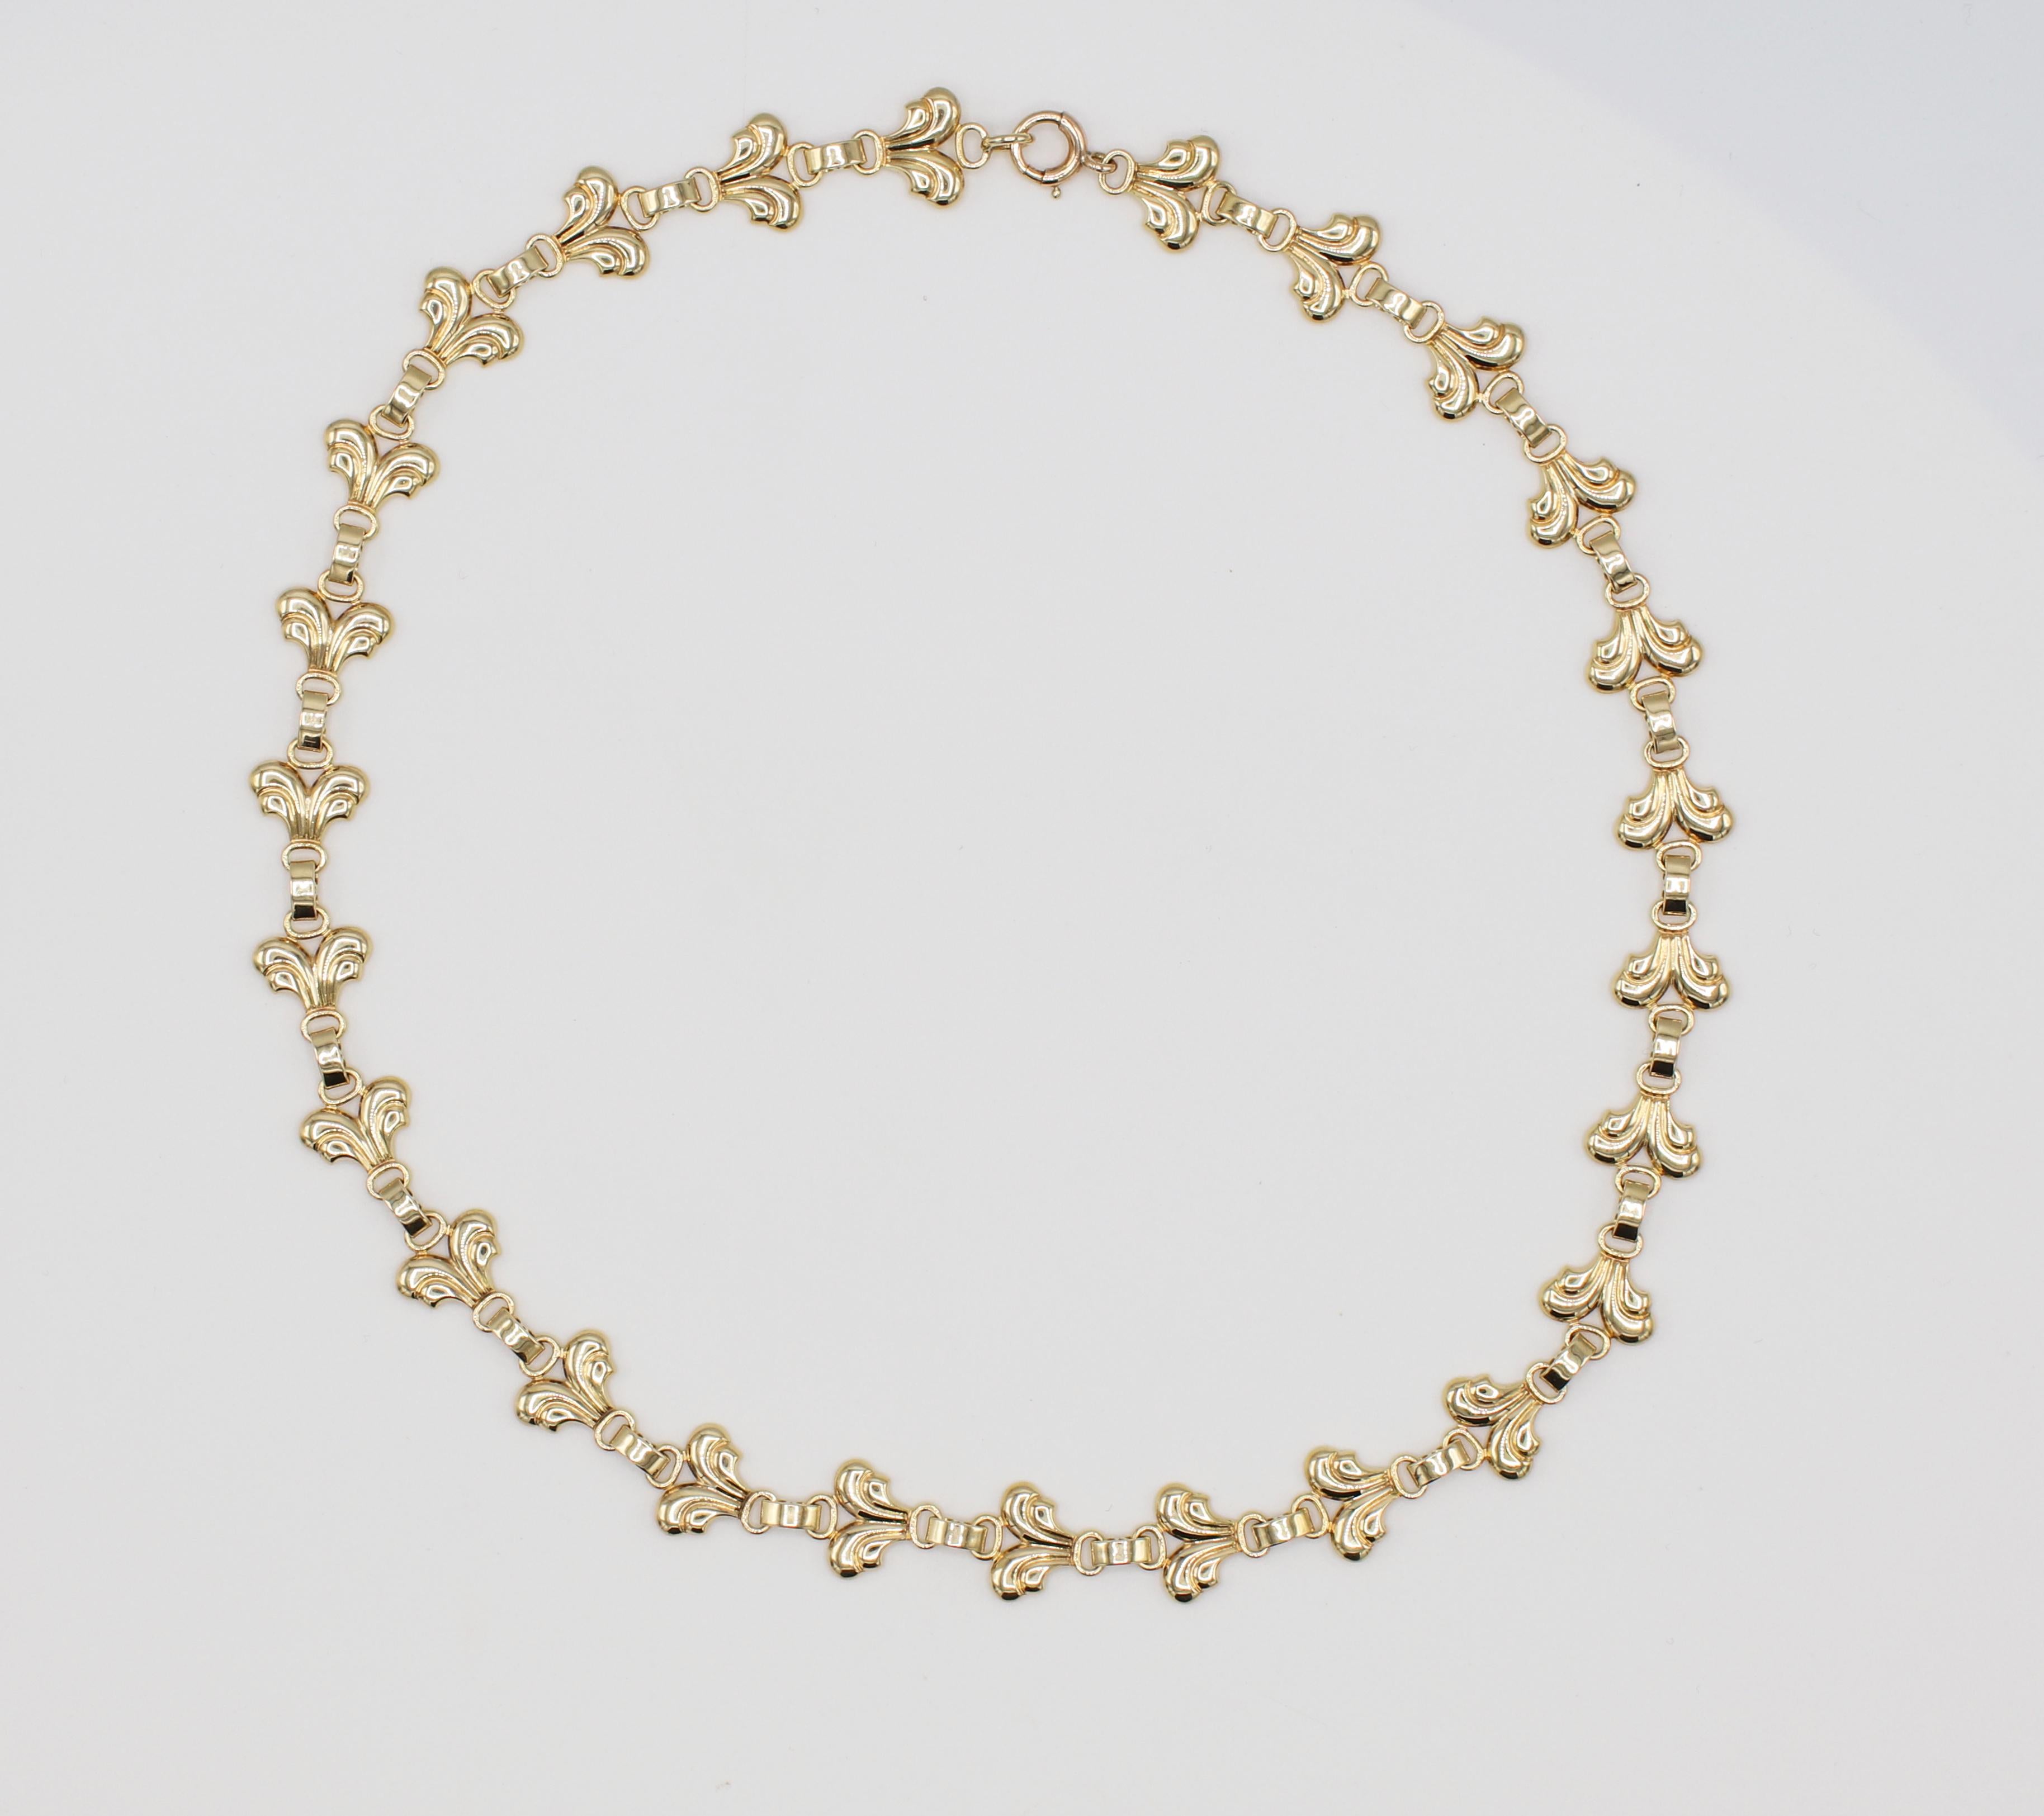 Tiffany & Co. Vintage 14 Karat Yellow Gold Necklace 
Metal: 14k yellow gold
Weight: 26.5 grams
Length: 16 inch
Width: 10.5MM
